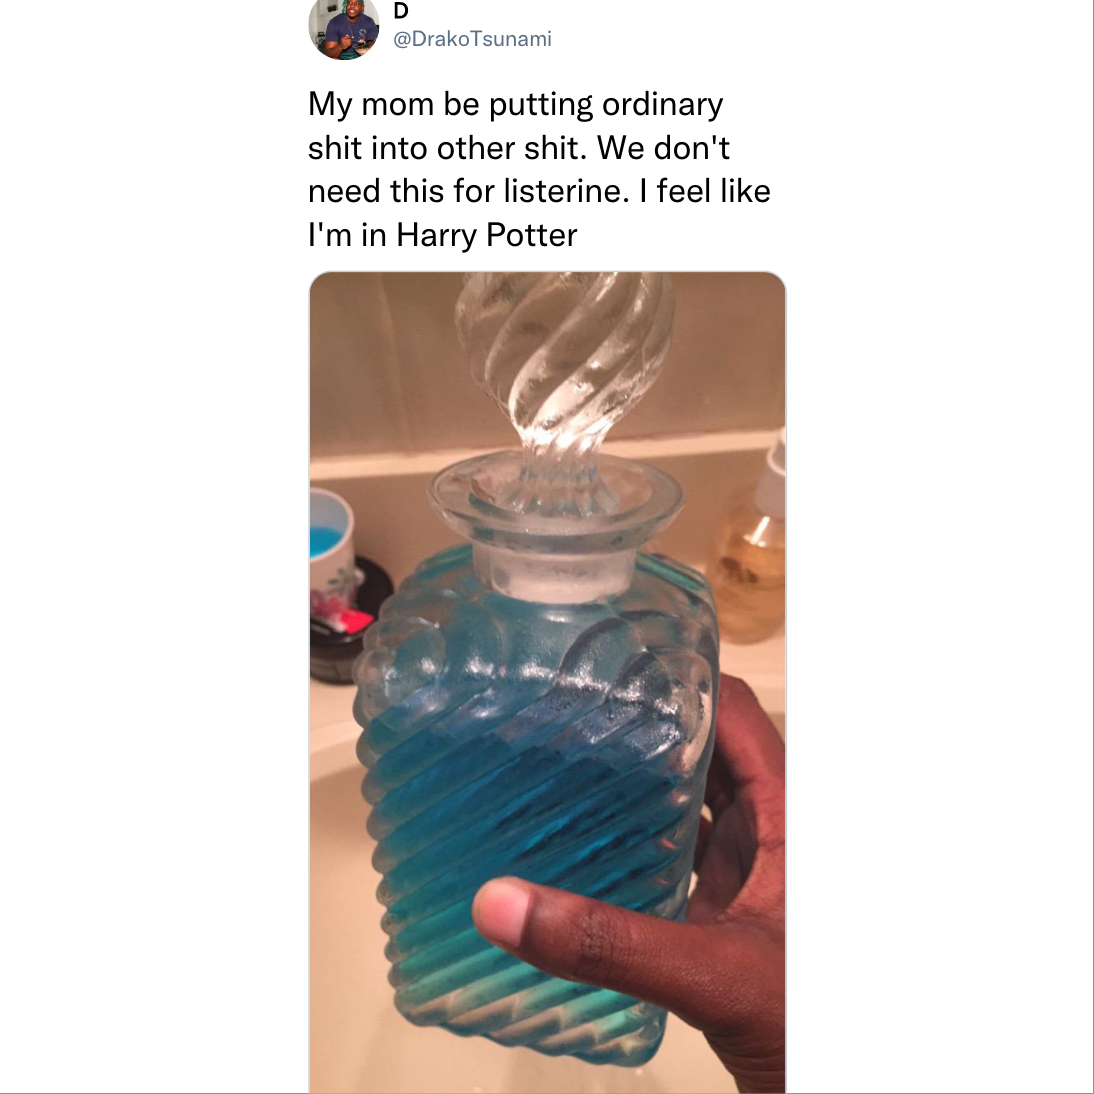 funny tweets - listerine harry potter meme - D Tsunami My mom be putting ordinary shit into other shit. We don't need this for listerine. I feel I'm in Harry Potter